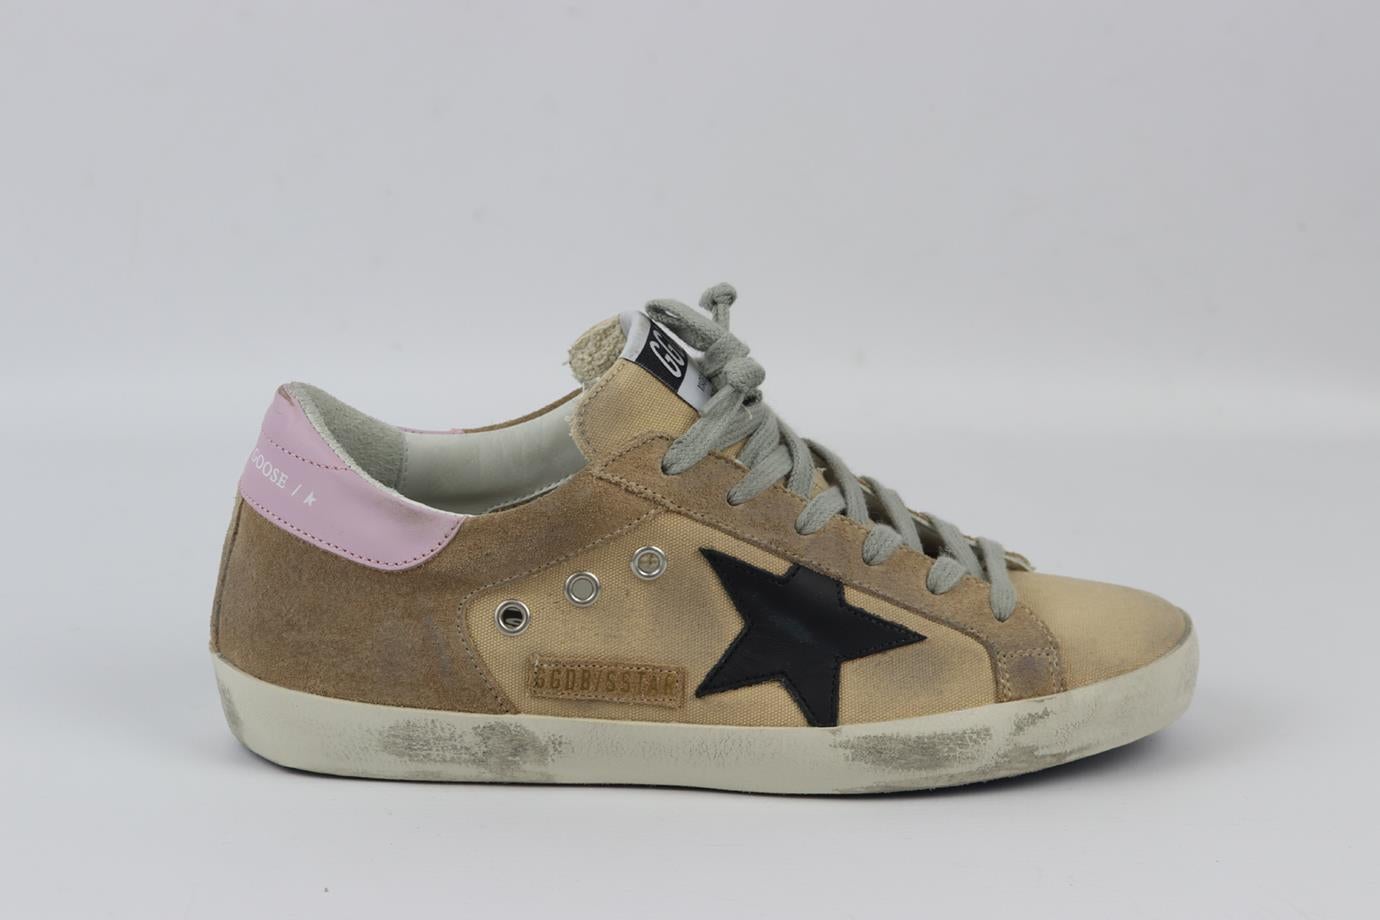 Golden Goose Deluxe Brand Superstar canvas, leather and suede sneakers. Beige, pink, black and grey. Lace up fastening at front. Does not come with dustbag or box. Size: EU 38 (UK 5, US 8). Insole: 9.8 in. Heel Height: 1.5 in. New without box